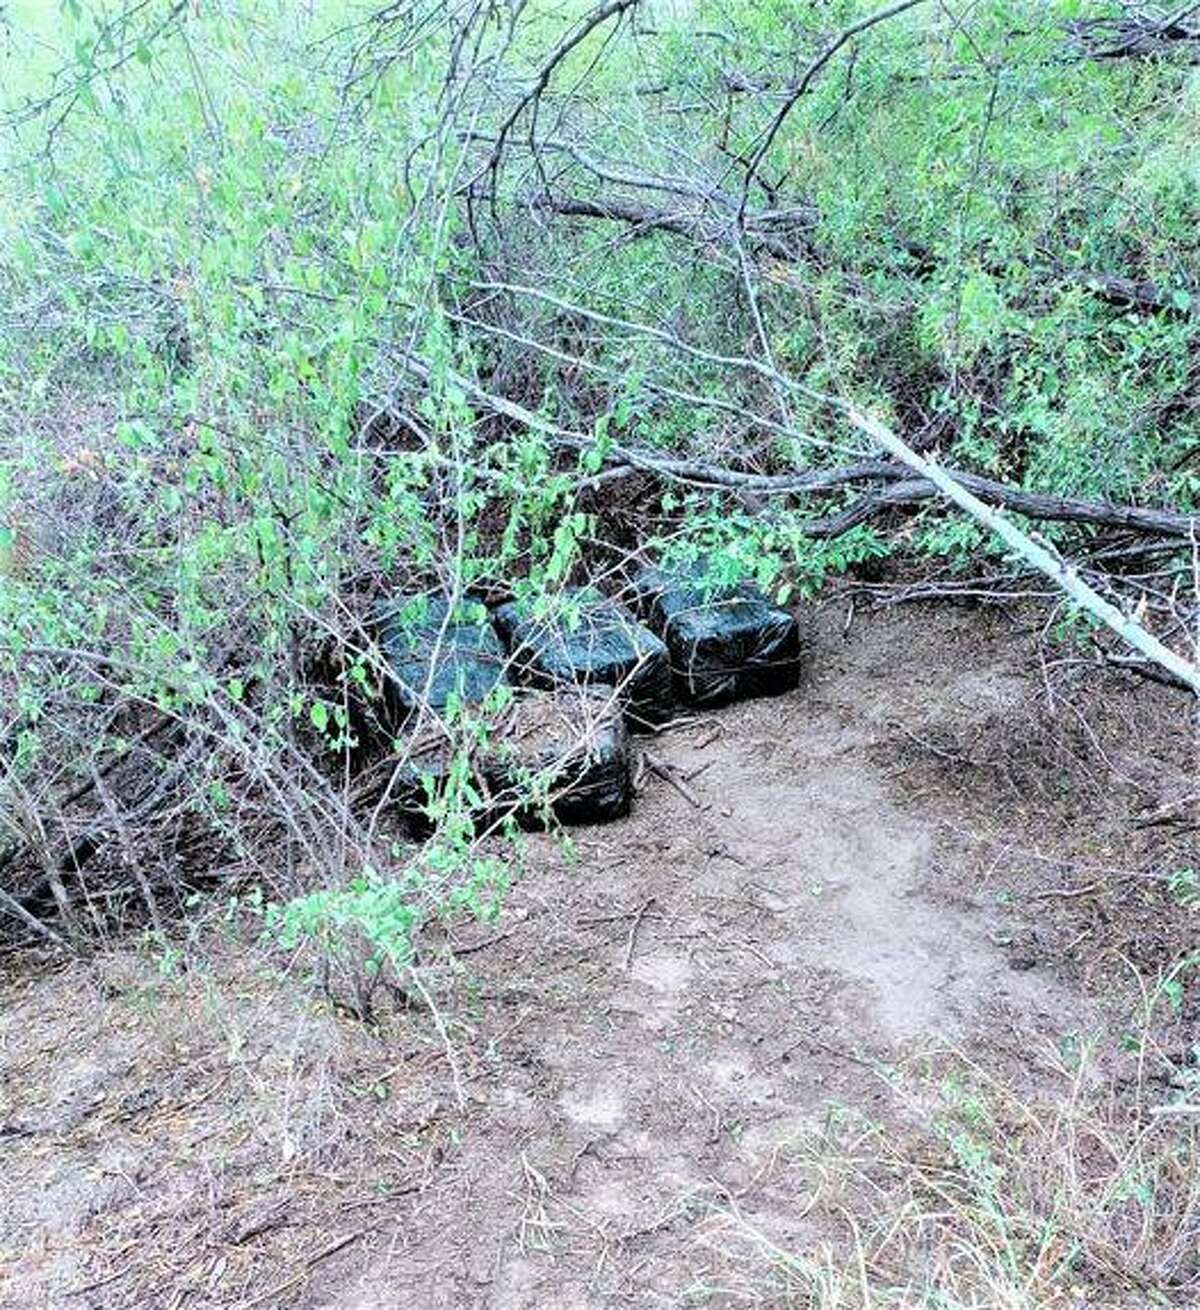 U.S. Border Patrol agents and the Mexican army joined efforts to seize more than 260 pounds of marijuana. The contraband had an estimated street value of $158,400.